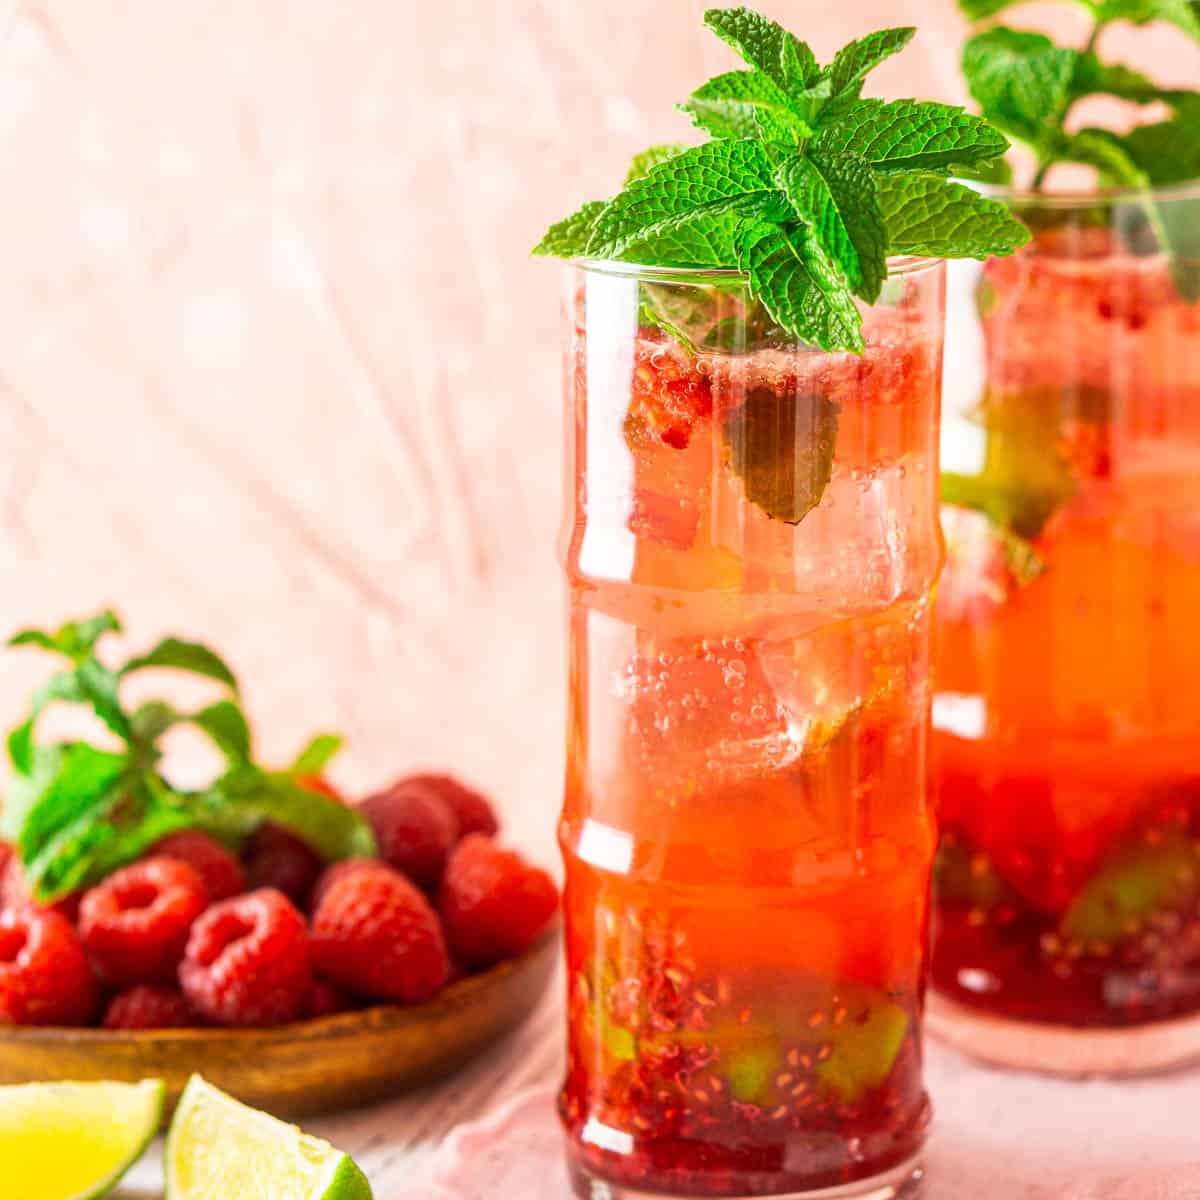 A raspberry mojito with fresh berries and lime wedges surrounding it against a pink background.